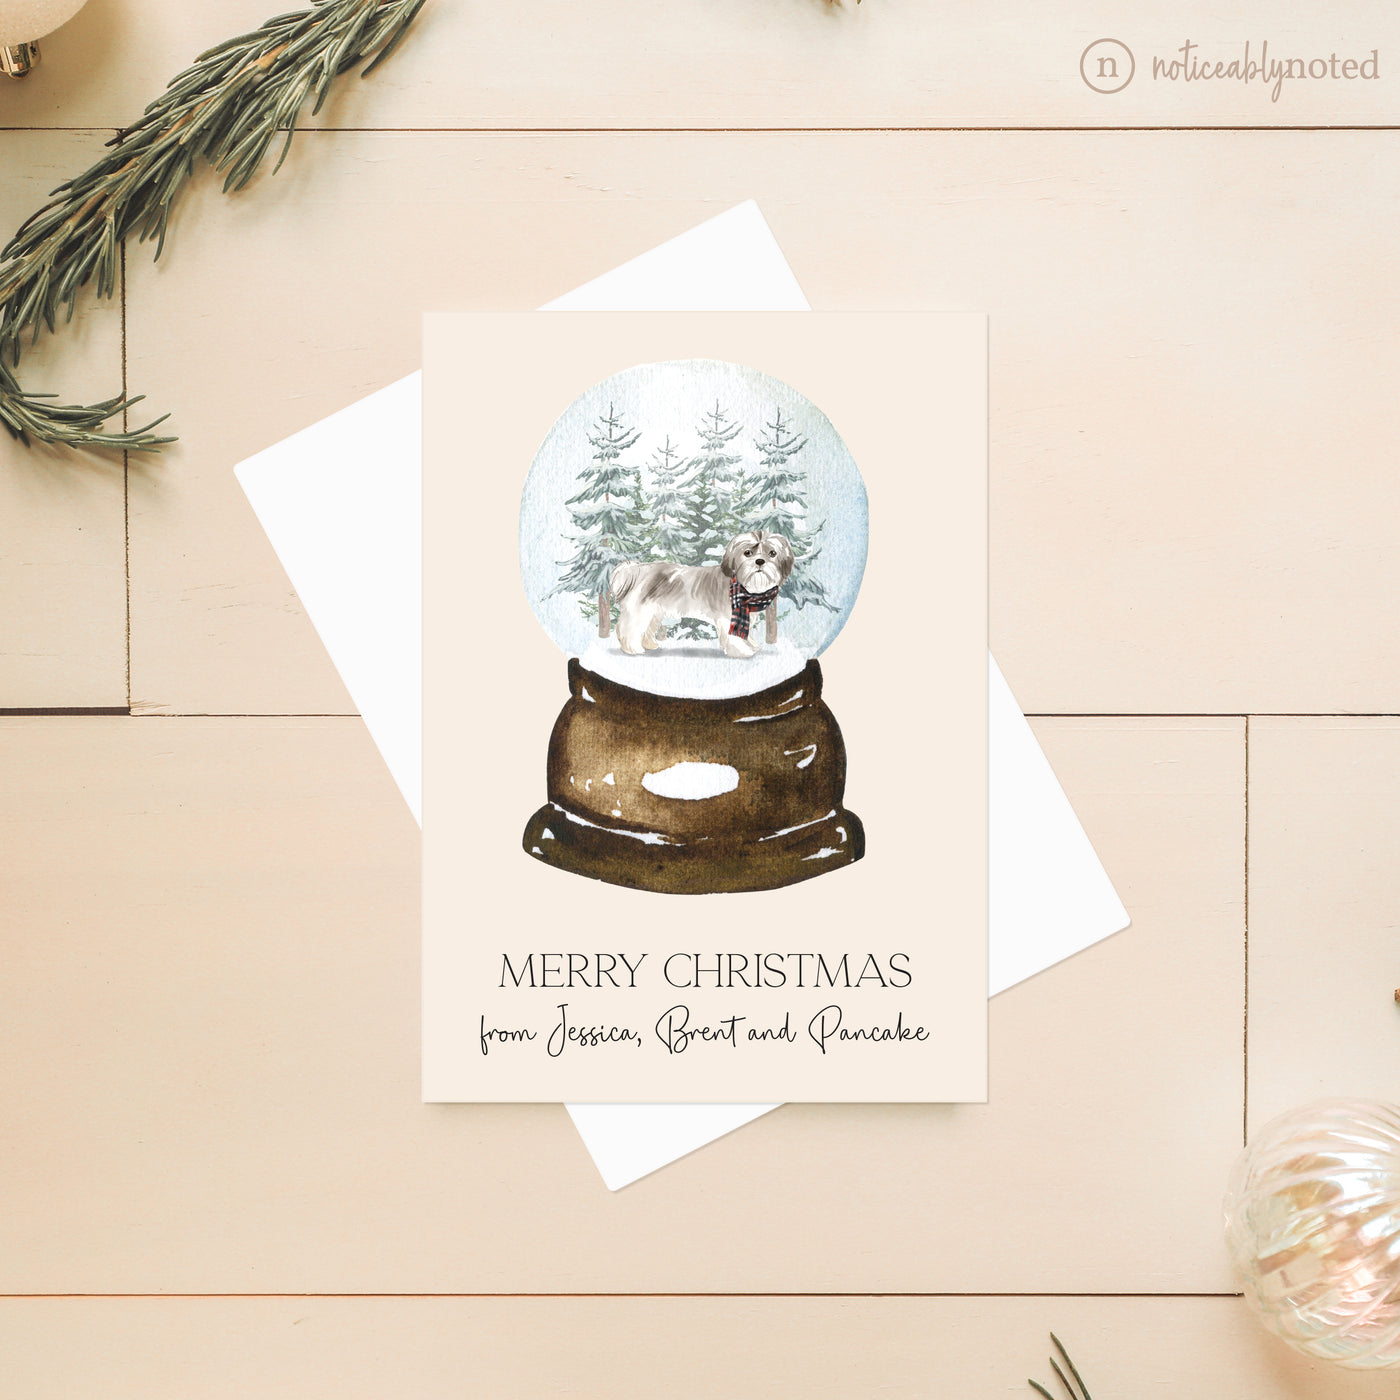 Shih Tzu Christmas Card | Noticeably Noted